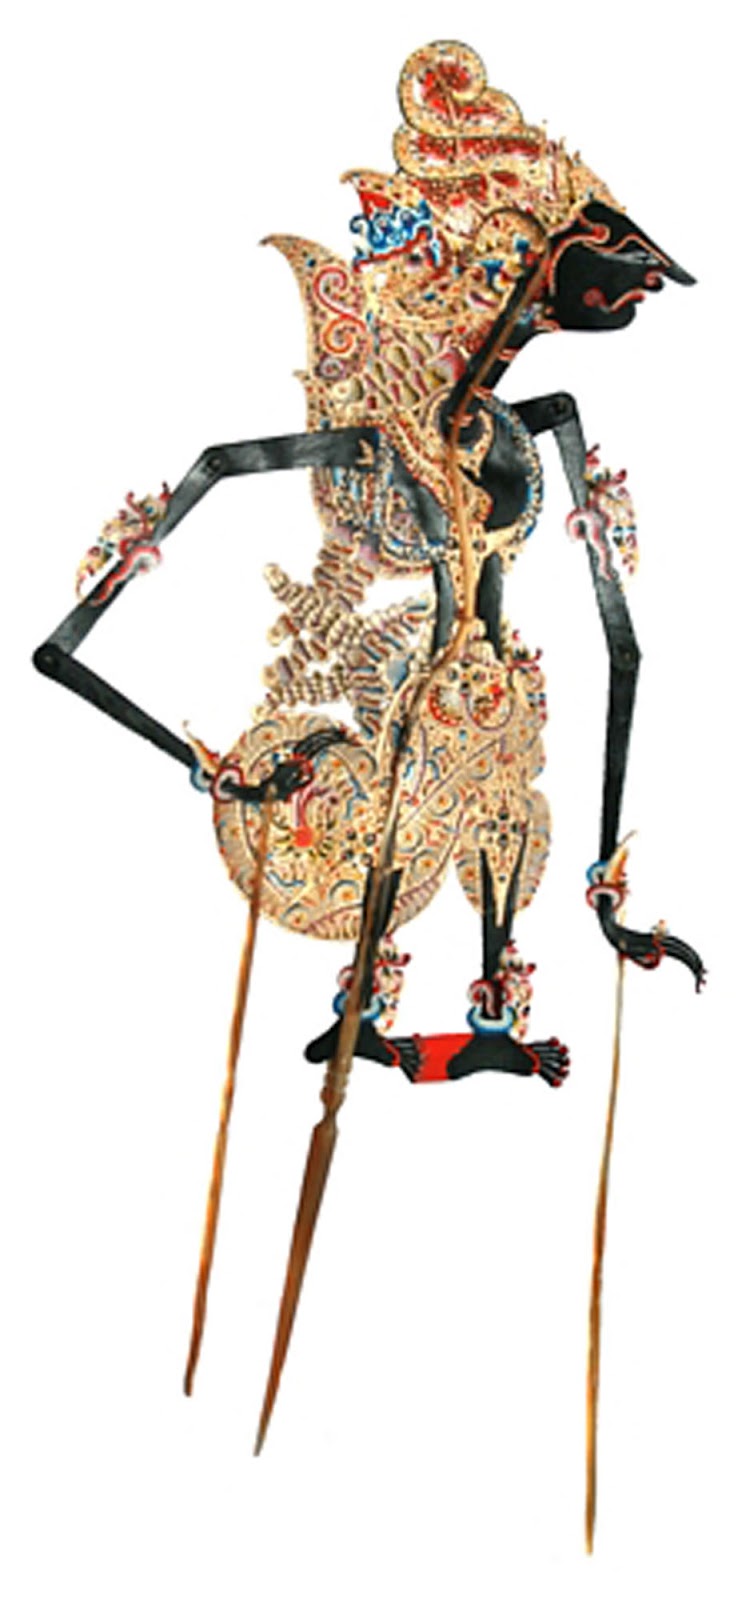 Wayang Kulit Puppets Characters | Search Results | Calendar 2015